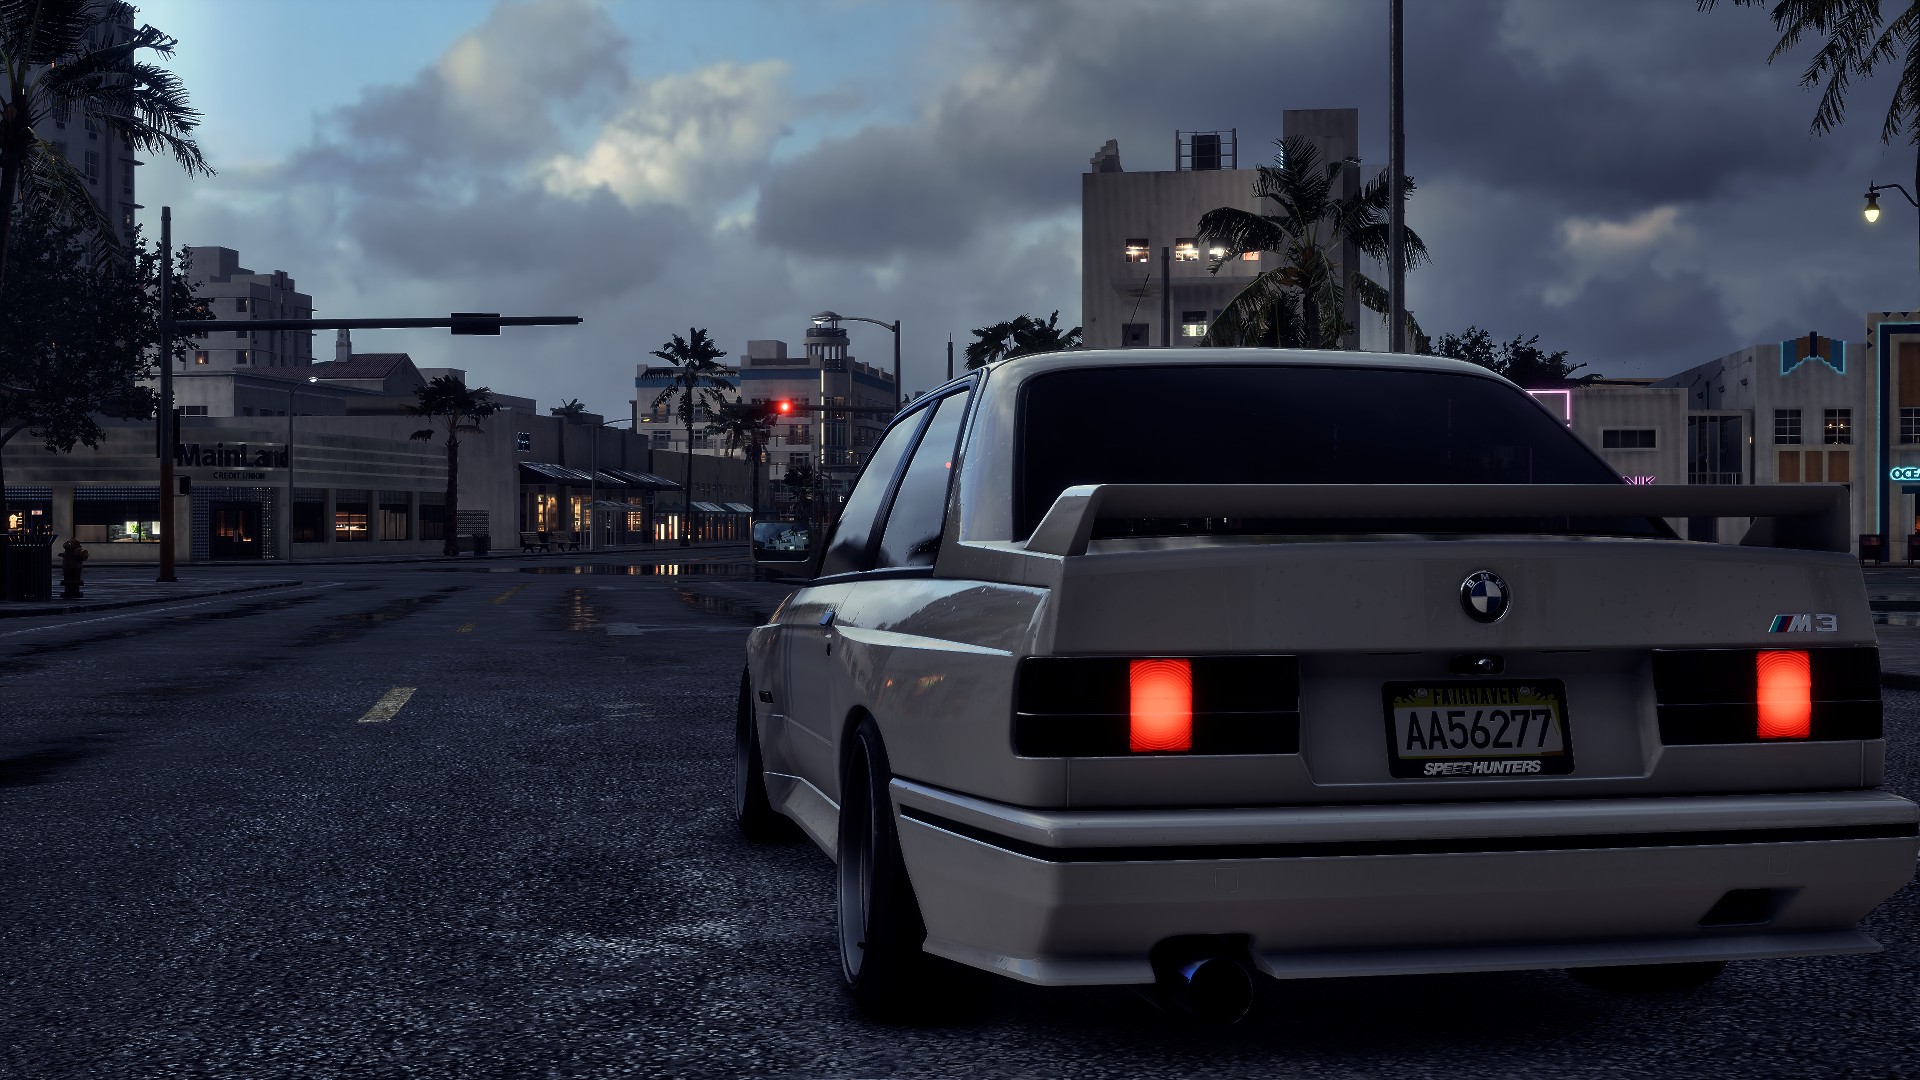 General 1920x1080 BMW E30 white street view city 4K Need for Speed: Heat car rear view BMW M3  BMW German cars video games Electronic Arts